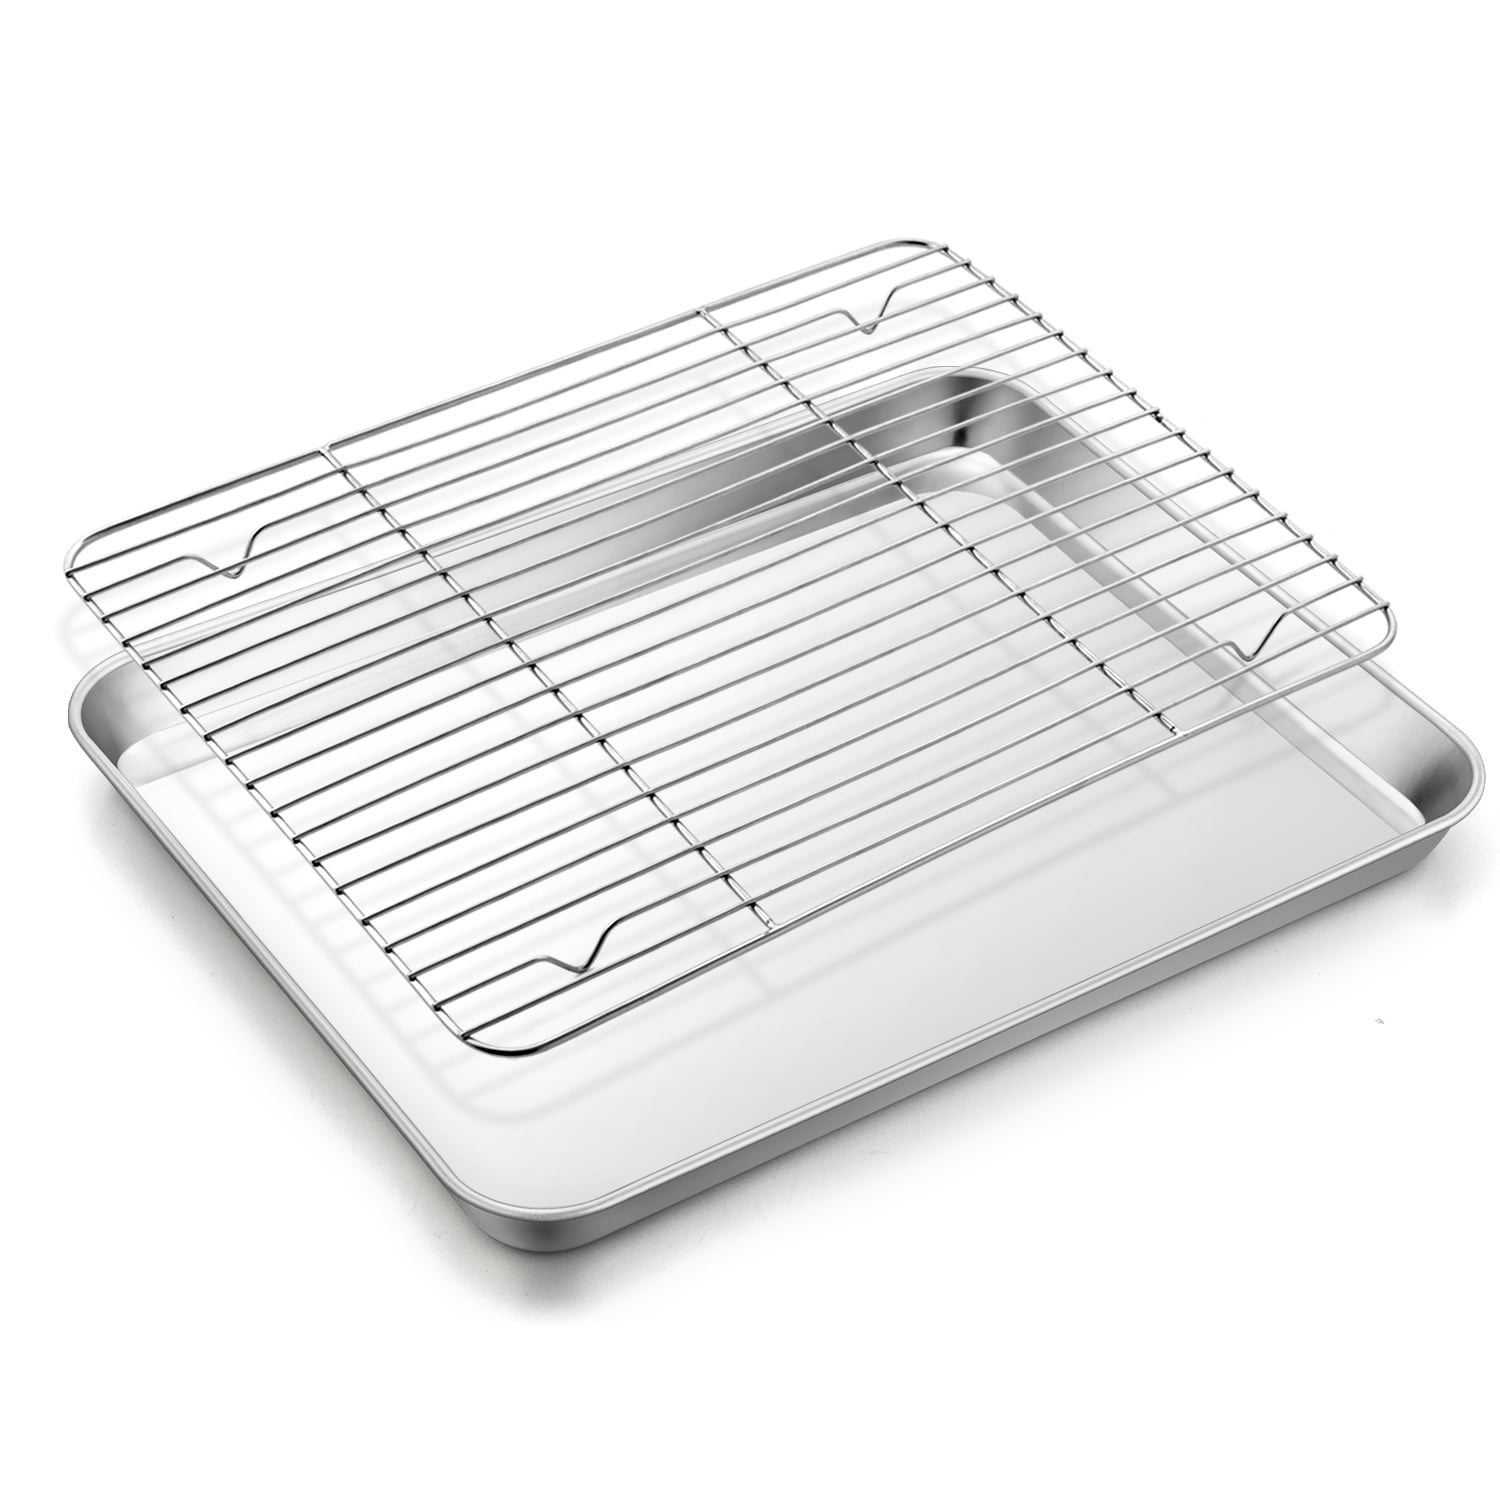 Stainless Steel Baking Sheet with Rack Set, E-far 16”x12” Cookie